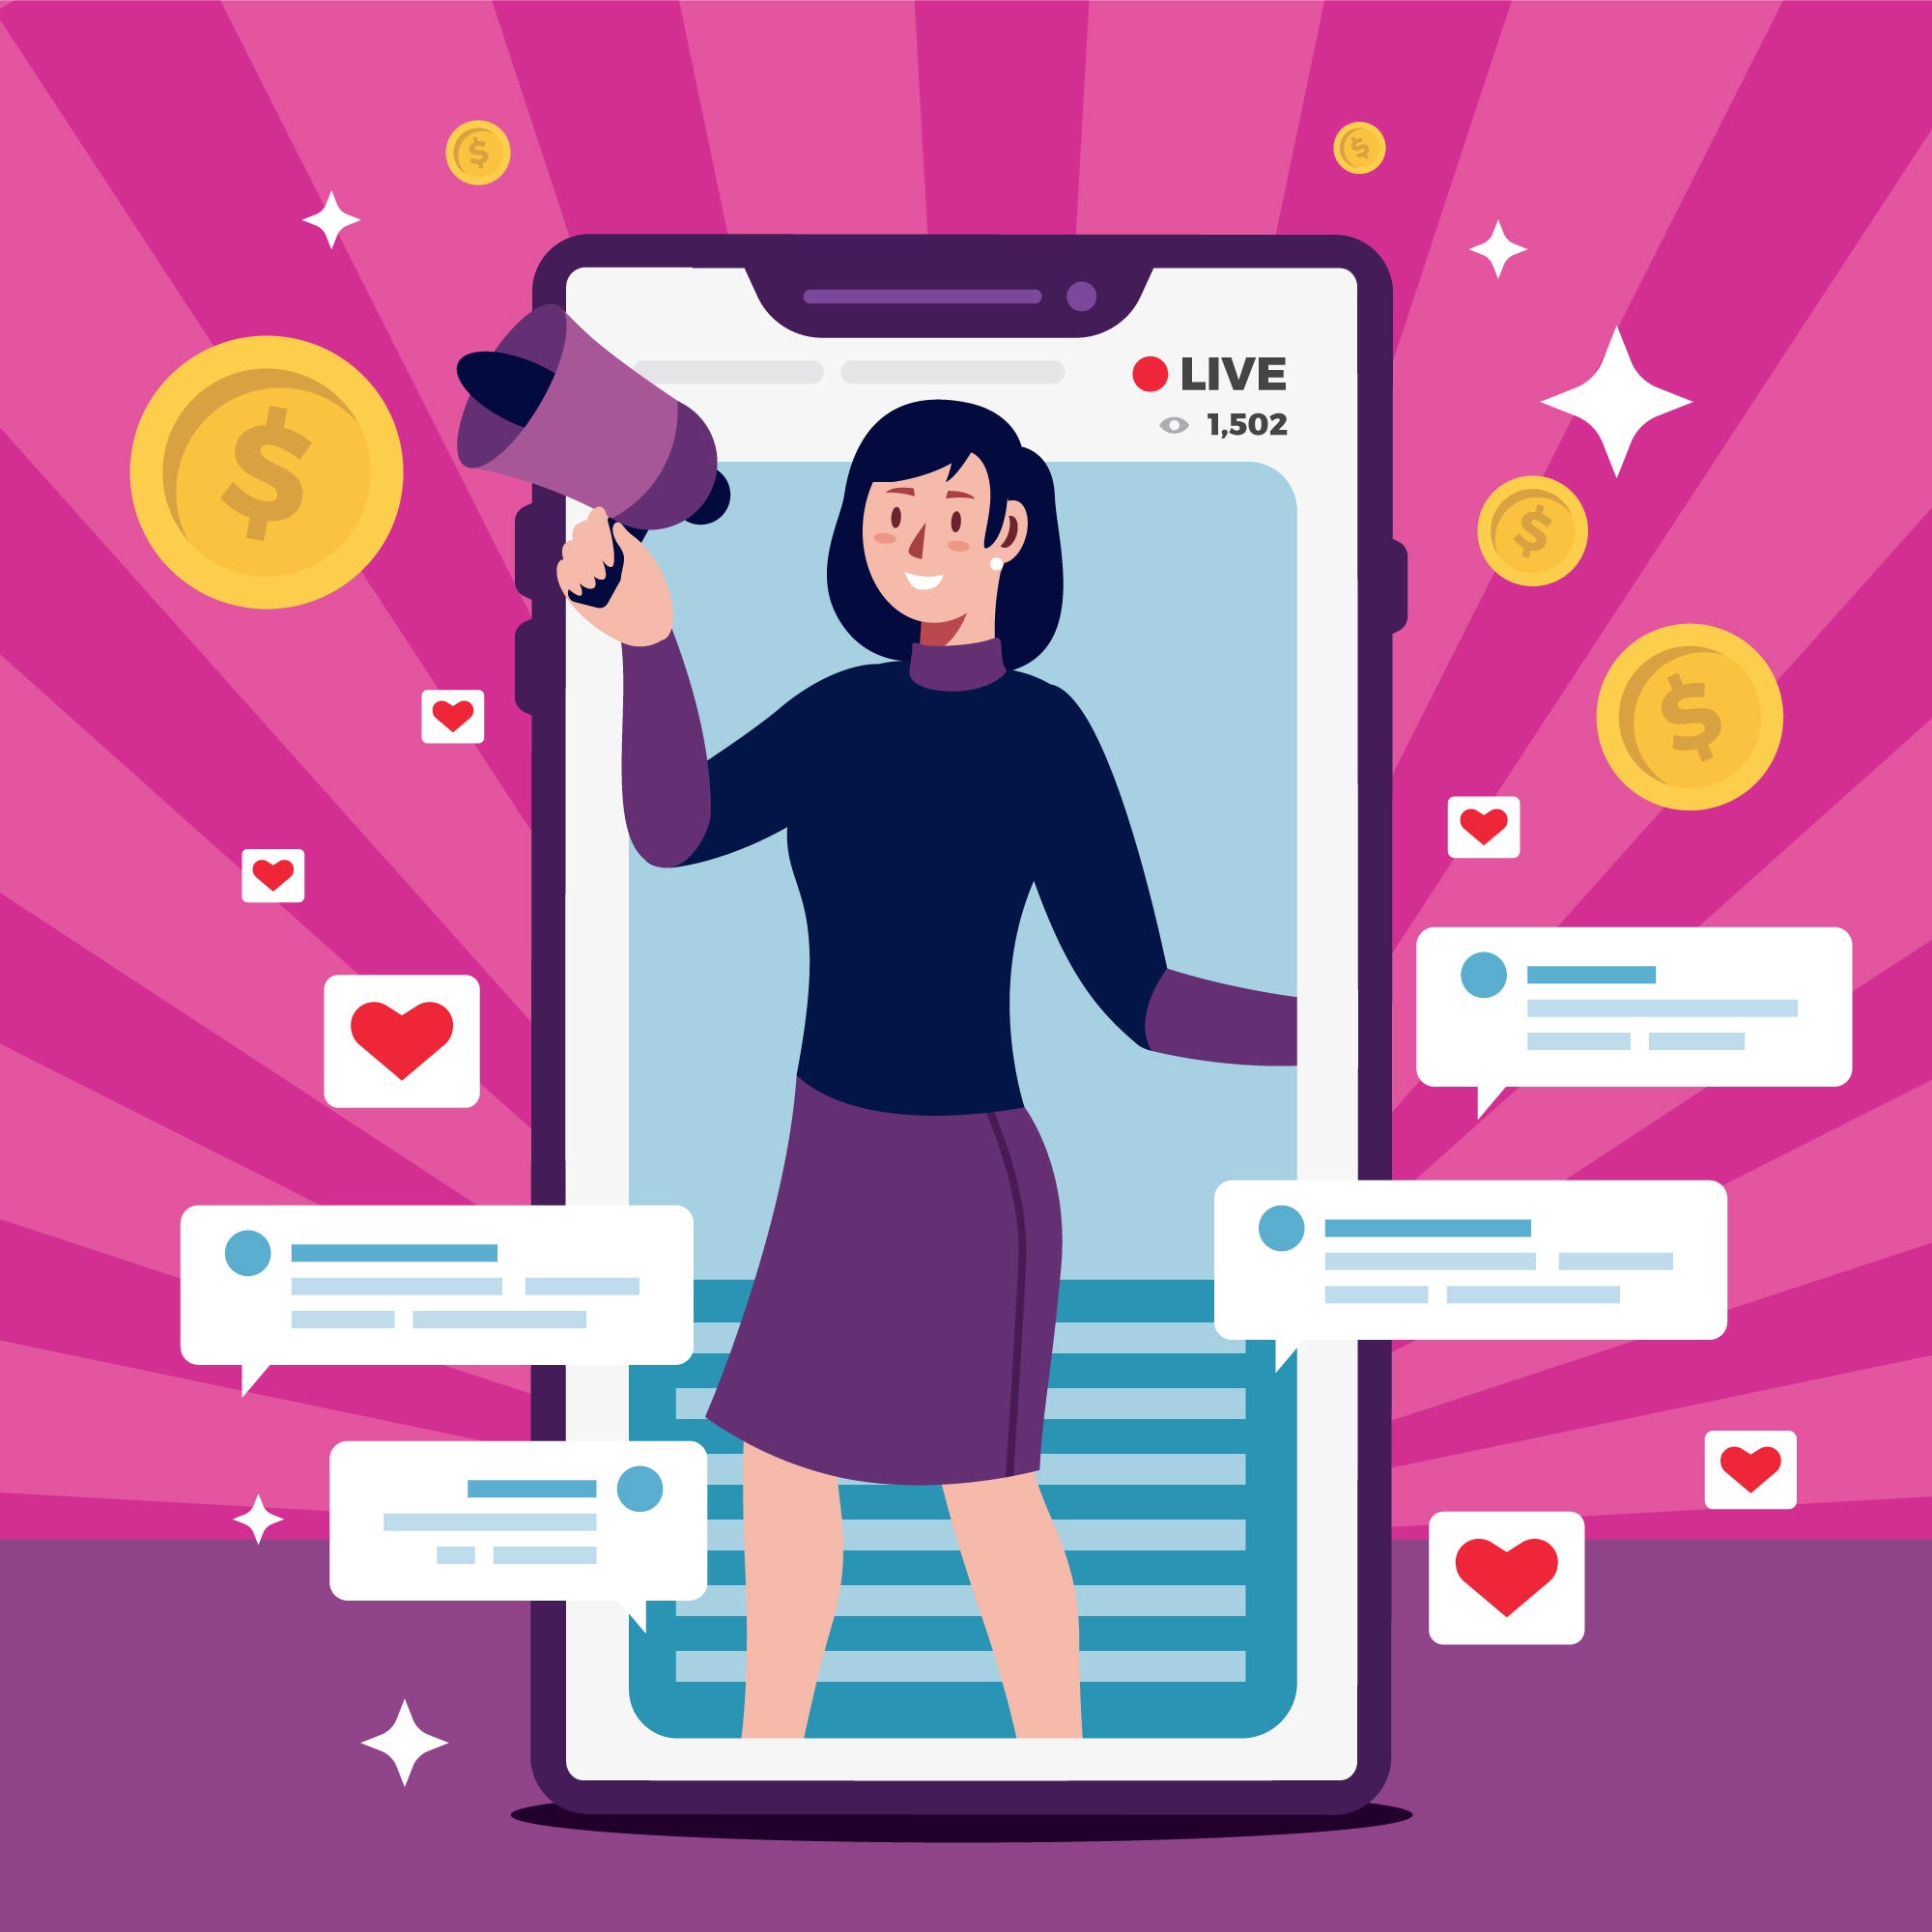 How to Benefit from Influencer Marketing as a Brand: Your Guide to Effective Influencer Marketing